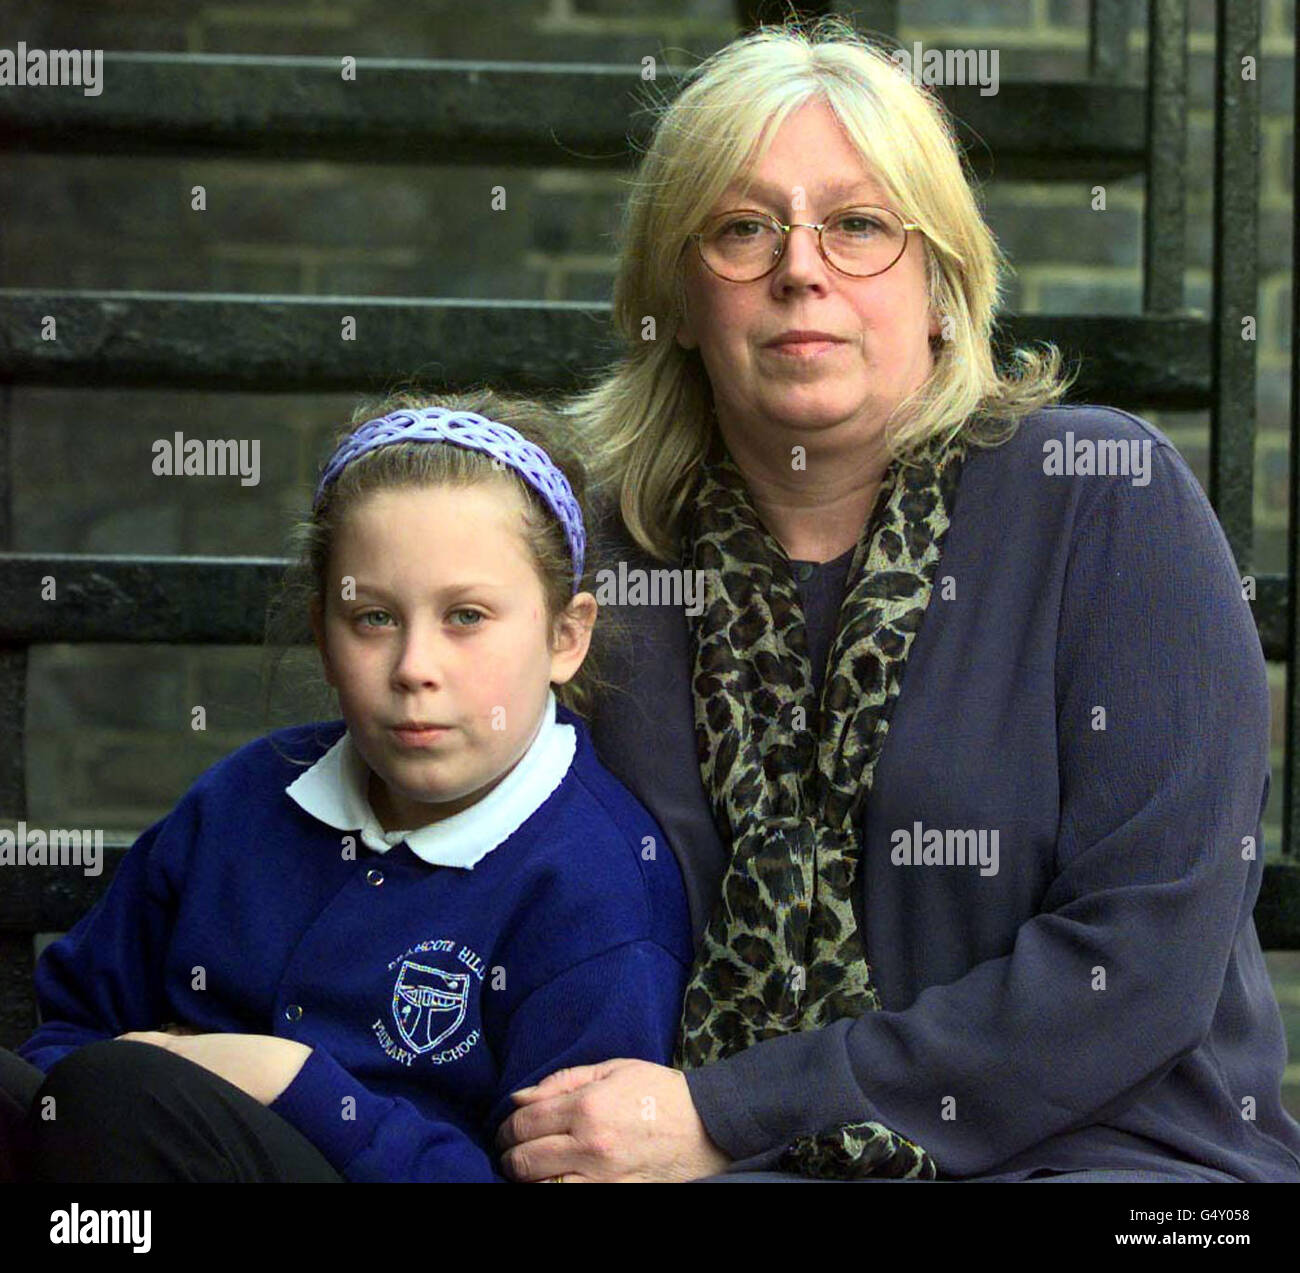 Dena Troussell, with 9 year old daughter Verity Ward, from Derbyshire. Verity is set to take her school, Bramcote Hills Primary, in Nottingham, to the High Court over what she claims is its failure to stop bullies making her life a misery. * The drastic move comes after what she alleges has been 18 months of verbal and physical abuse at the hands of her tormenters. Stock Photo